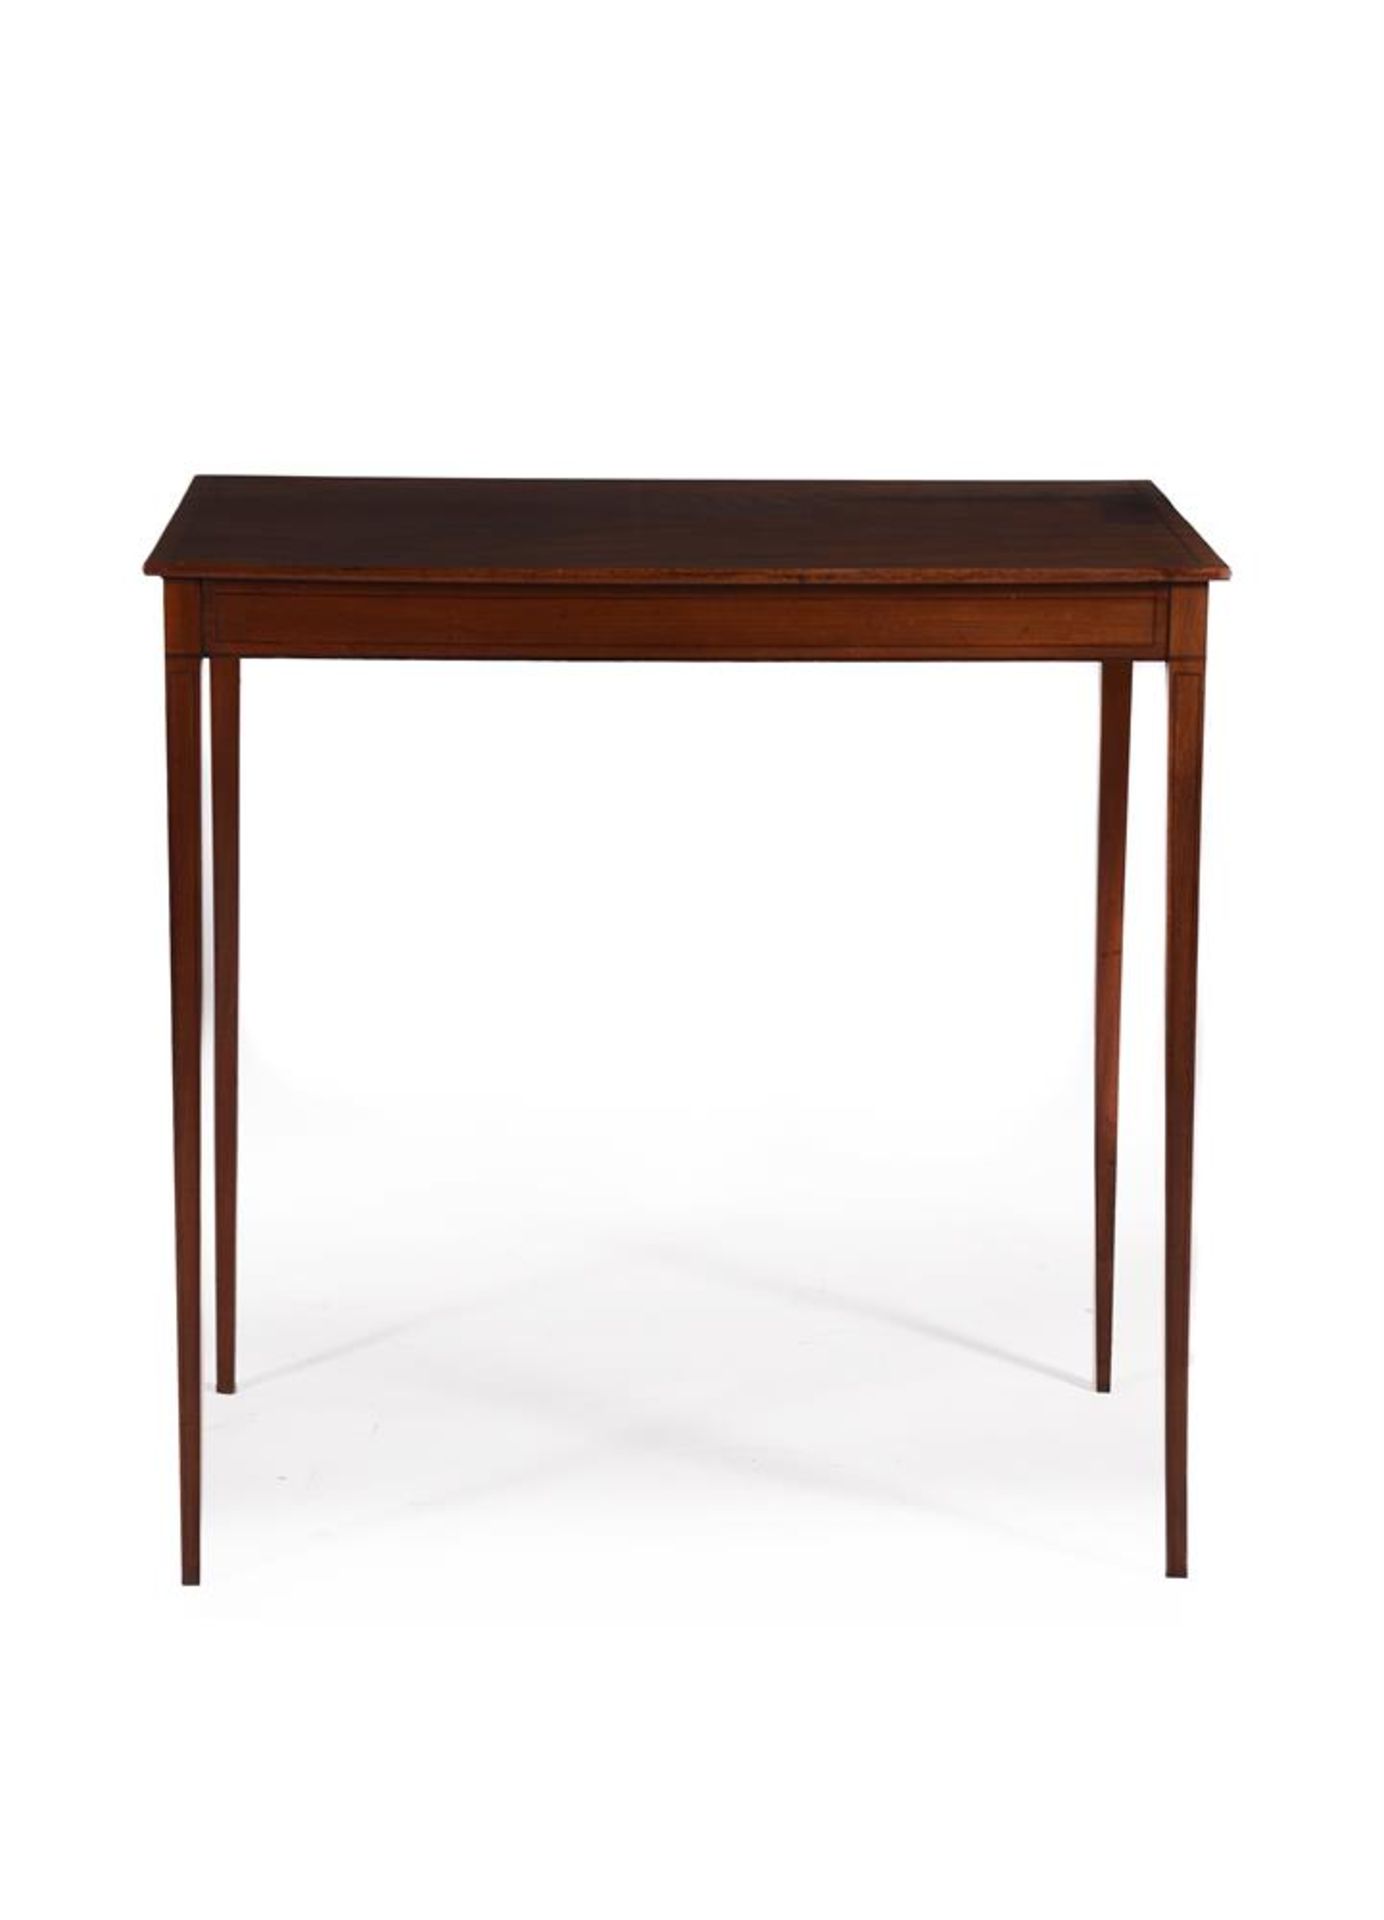 A REGENCY MAHOGANY AND LINE INLAID SIDE OR OCCASIONAL TABLE, CIRCA 1815 - Image 2 of 4